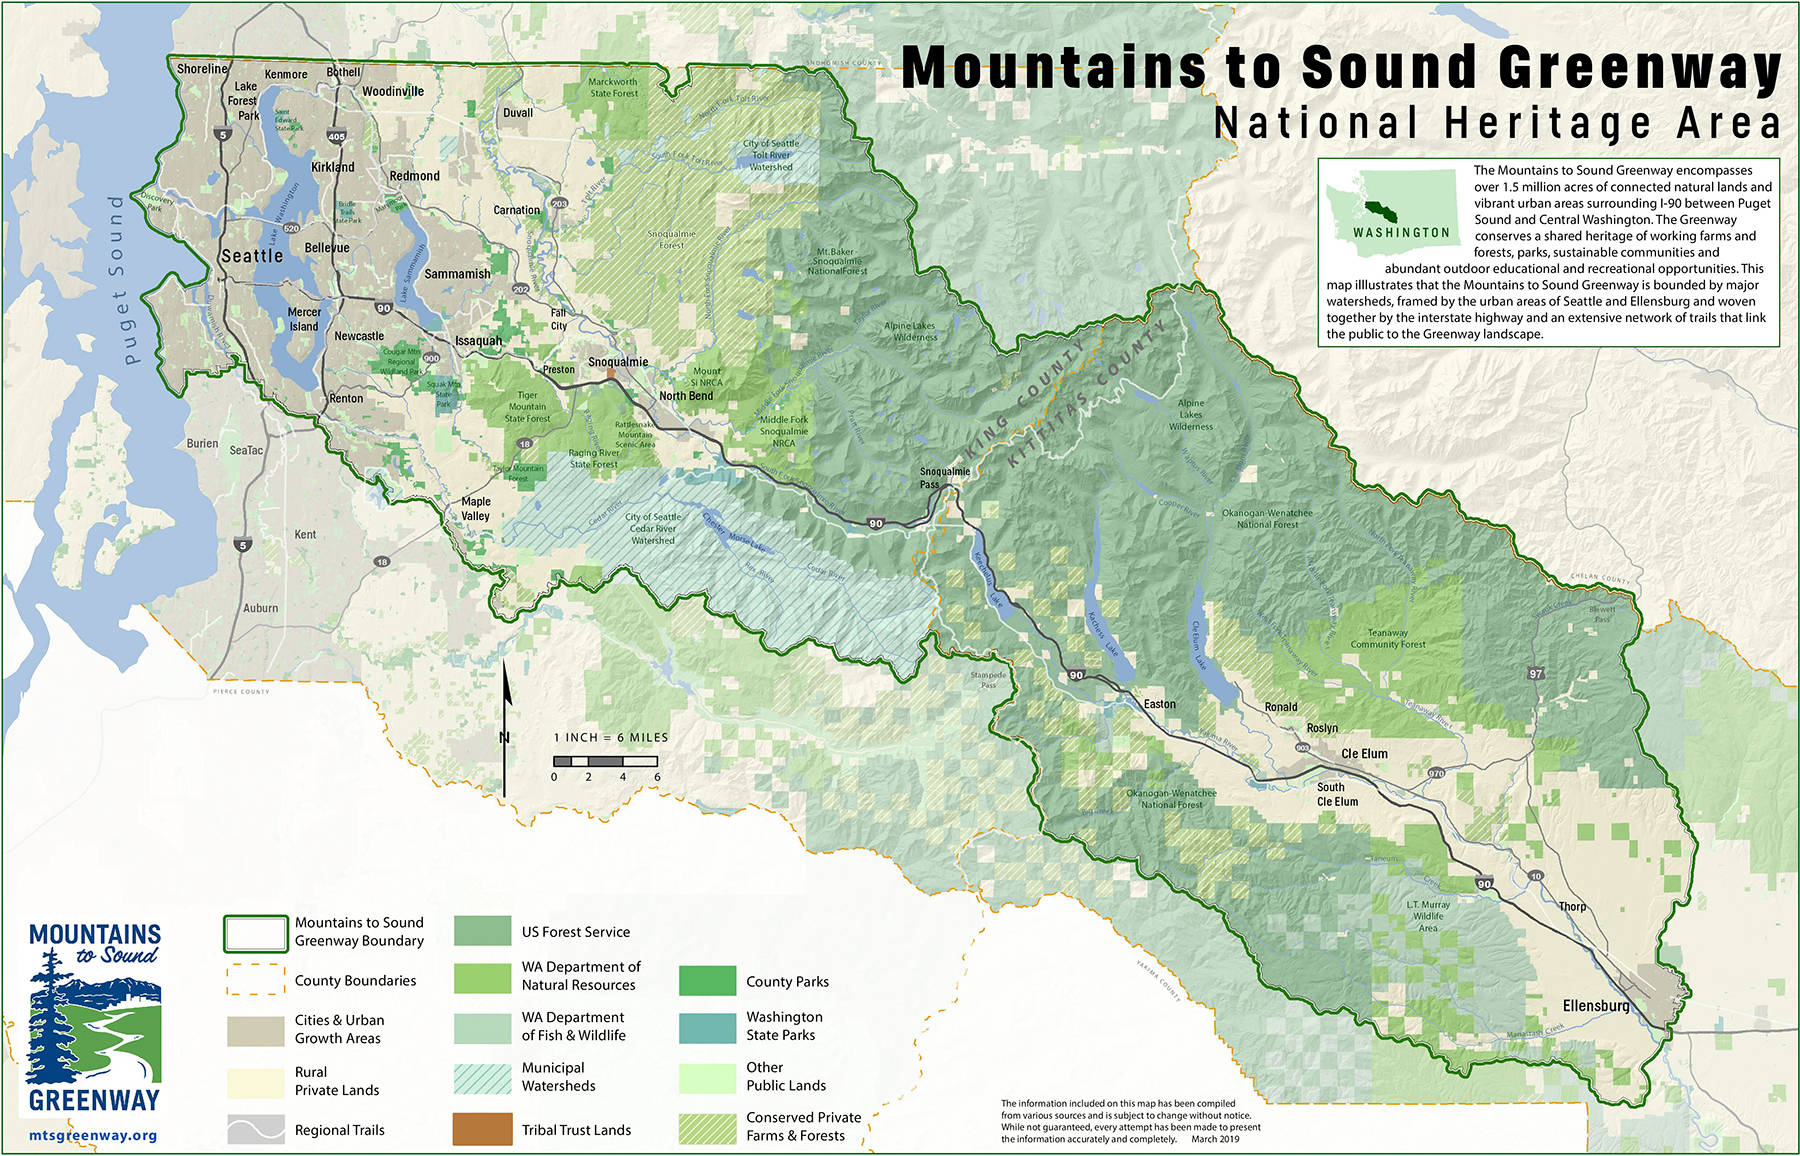 The Mountains to Sound Greenway was recently was designated as a National Heritage area. Photo courtesy of Mountains to Sound Greenway